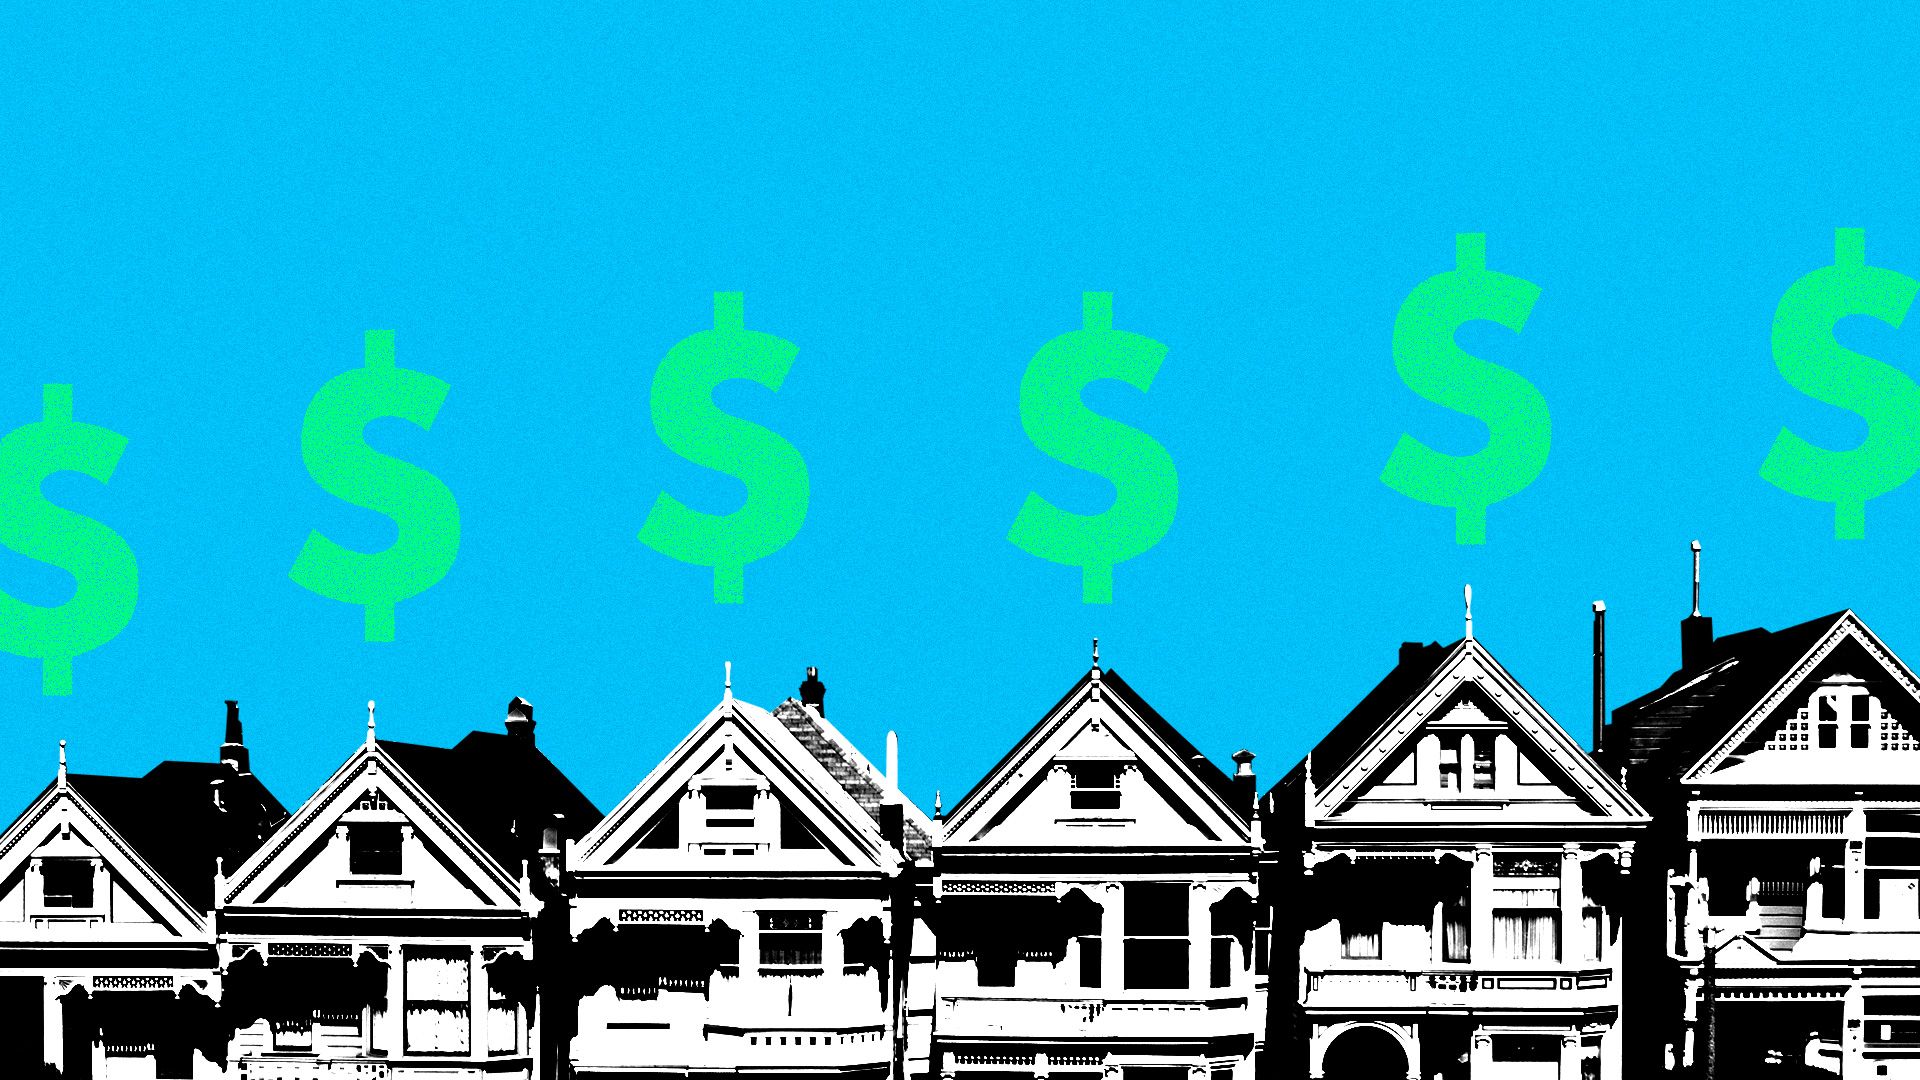 San Francisco rowhouses with dollar signs floating above them